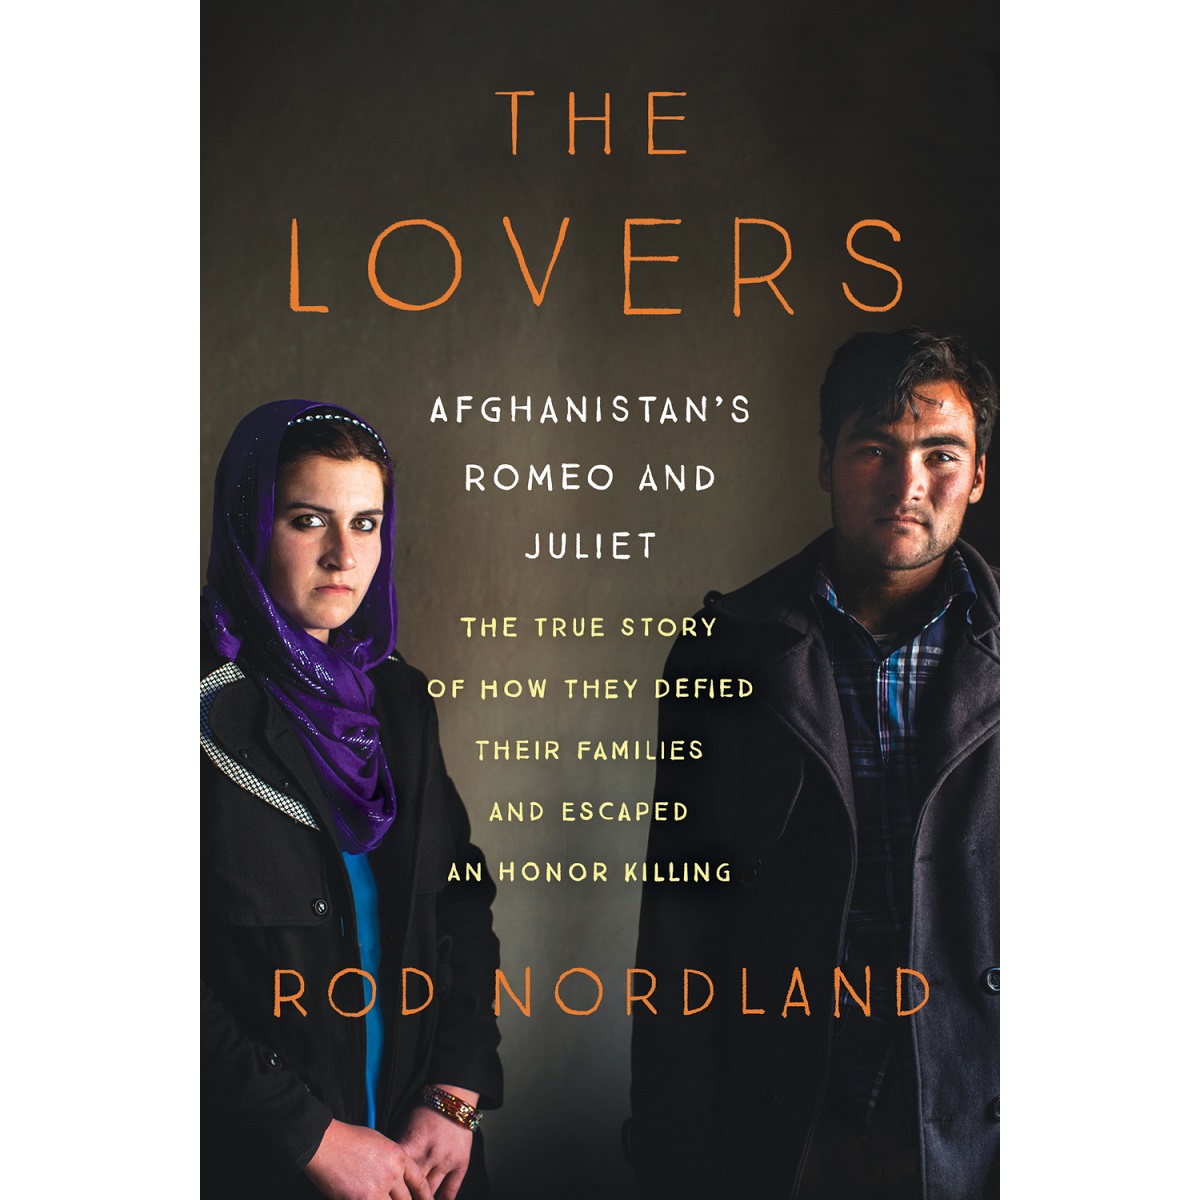 The Lovers: Romeo and Juliet in Afghanistan by Rod Nordland